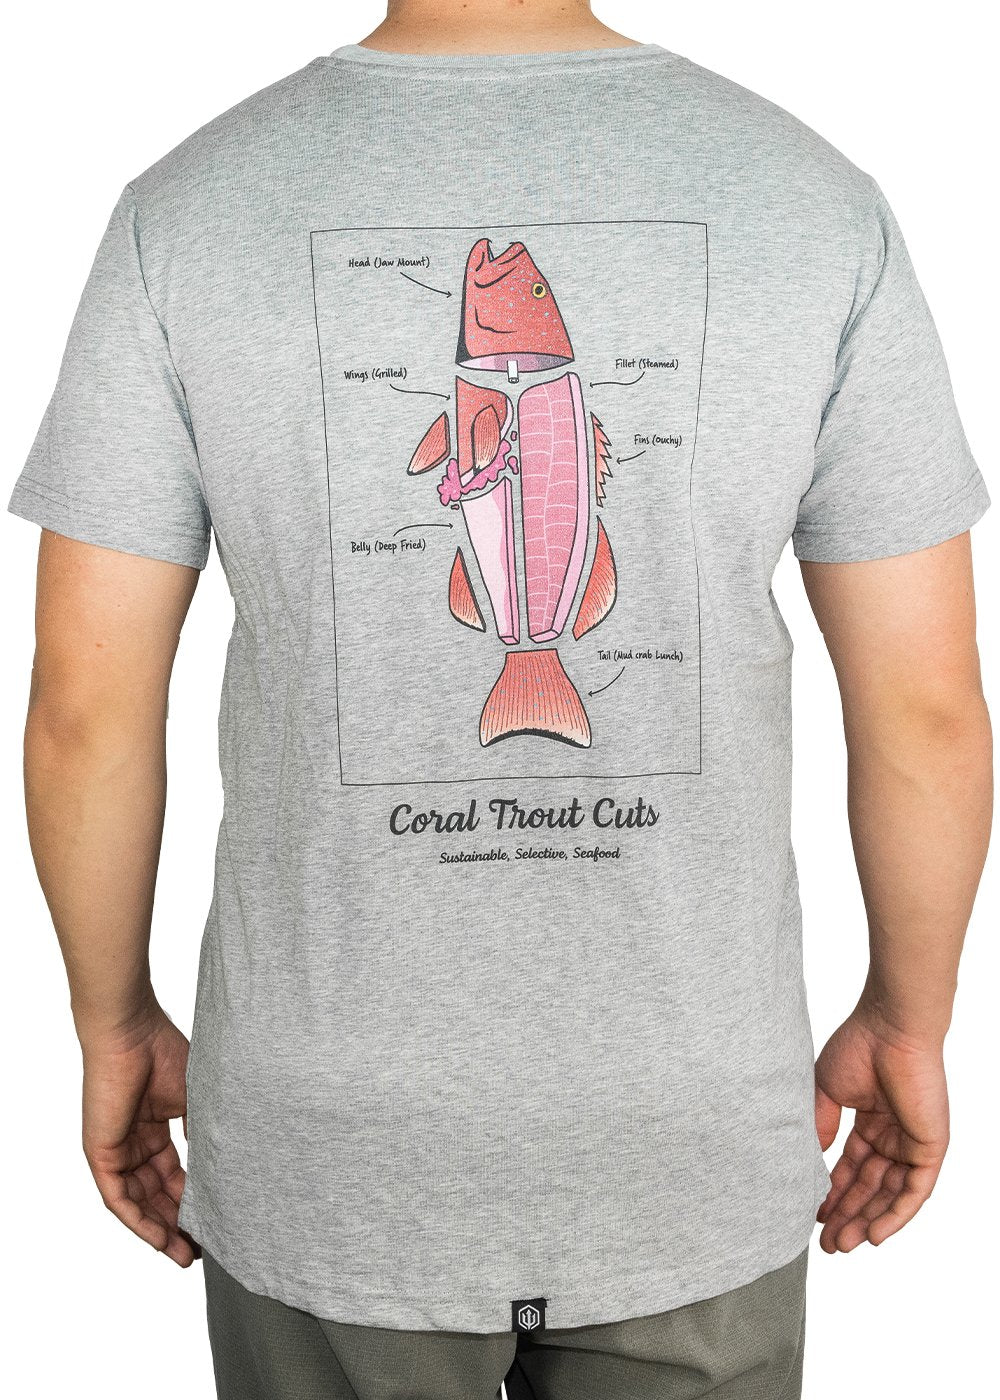 Adreno Cook Your Catch T-Shirt - Coral TroutAdreno Cook Your Catch T-Shirt - Coral Trout